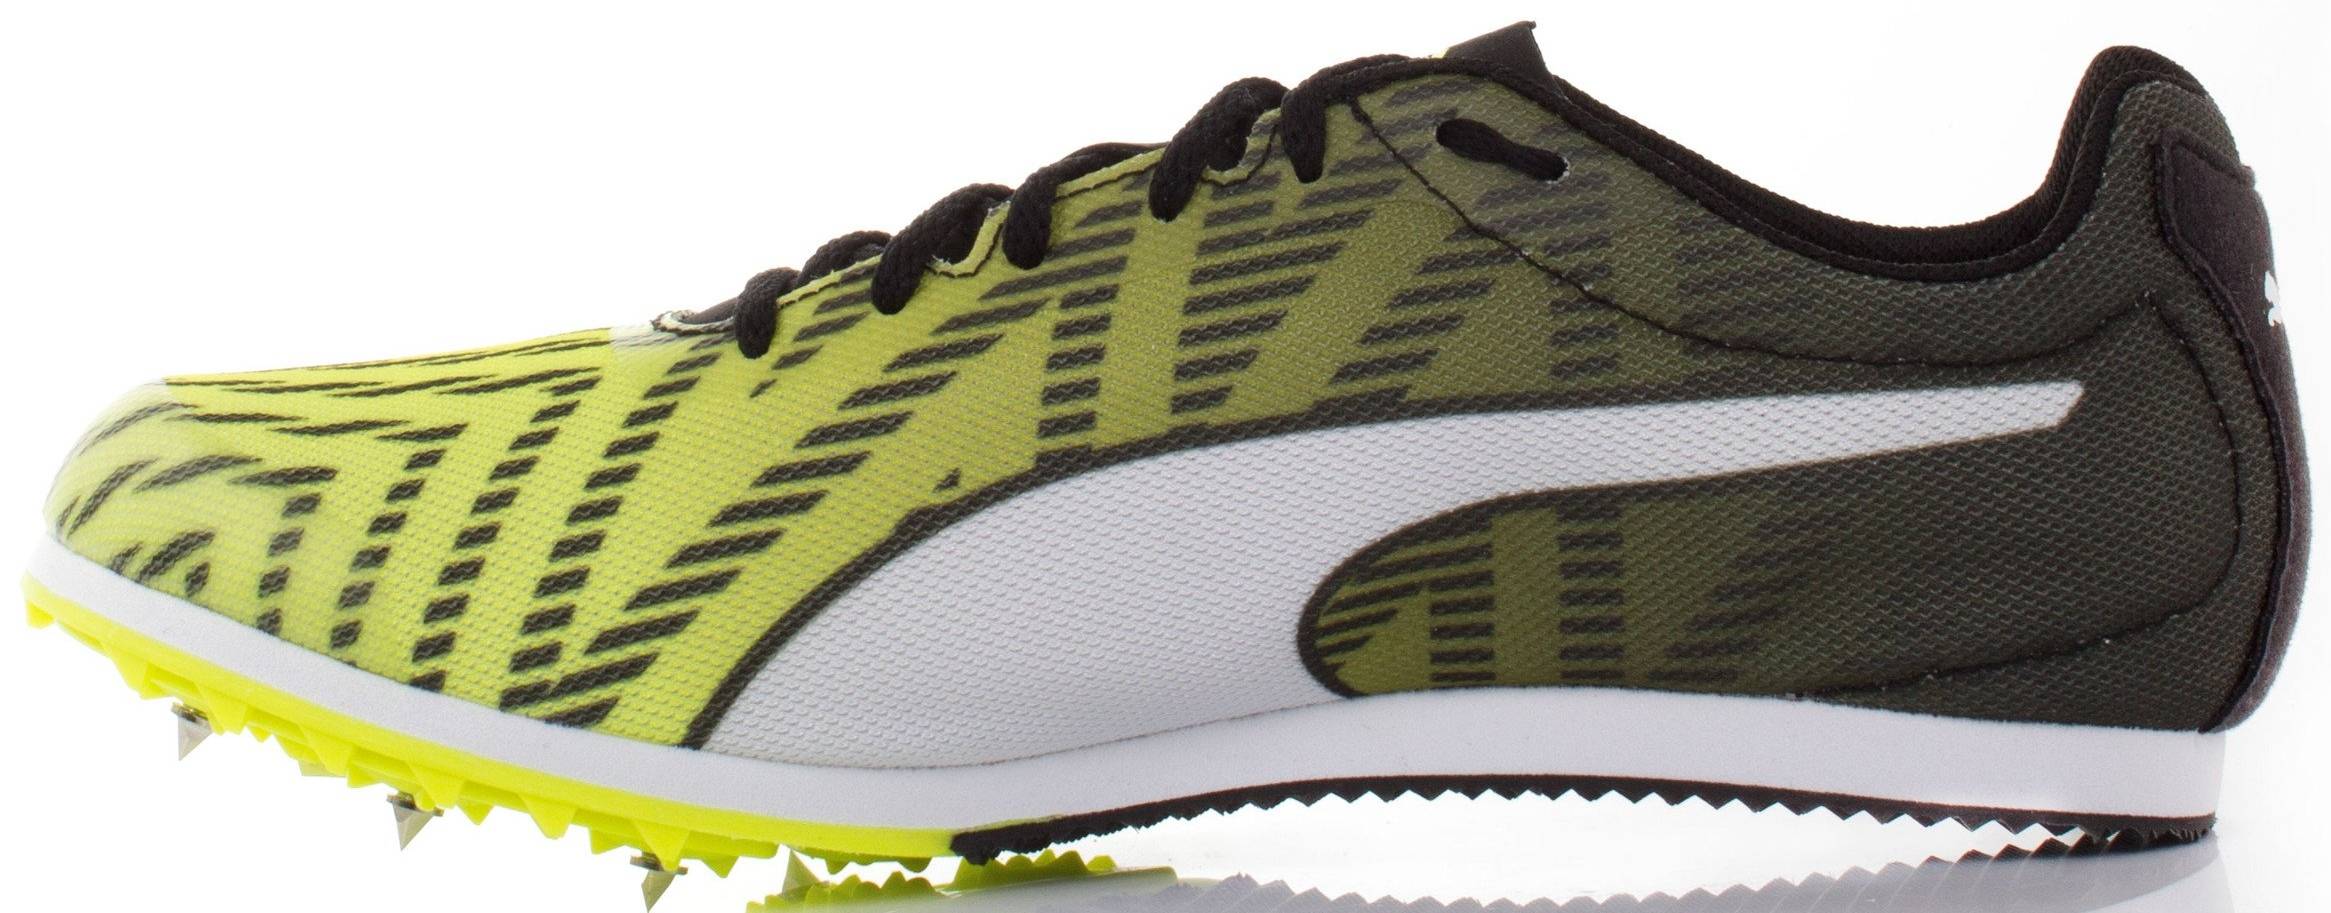 Only £41 + Review of Puma Evospeed Star 5 | RunRepeat